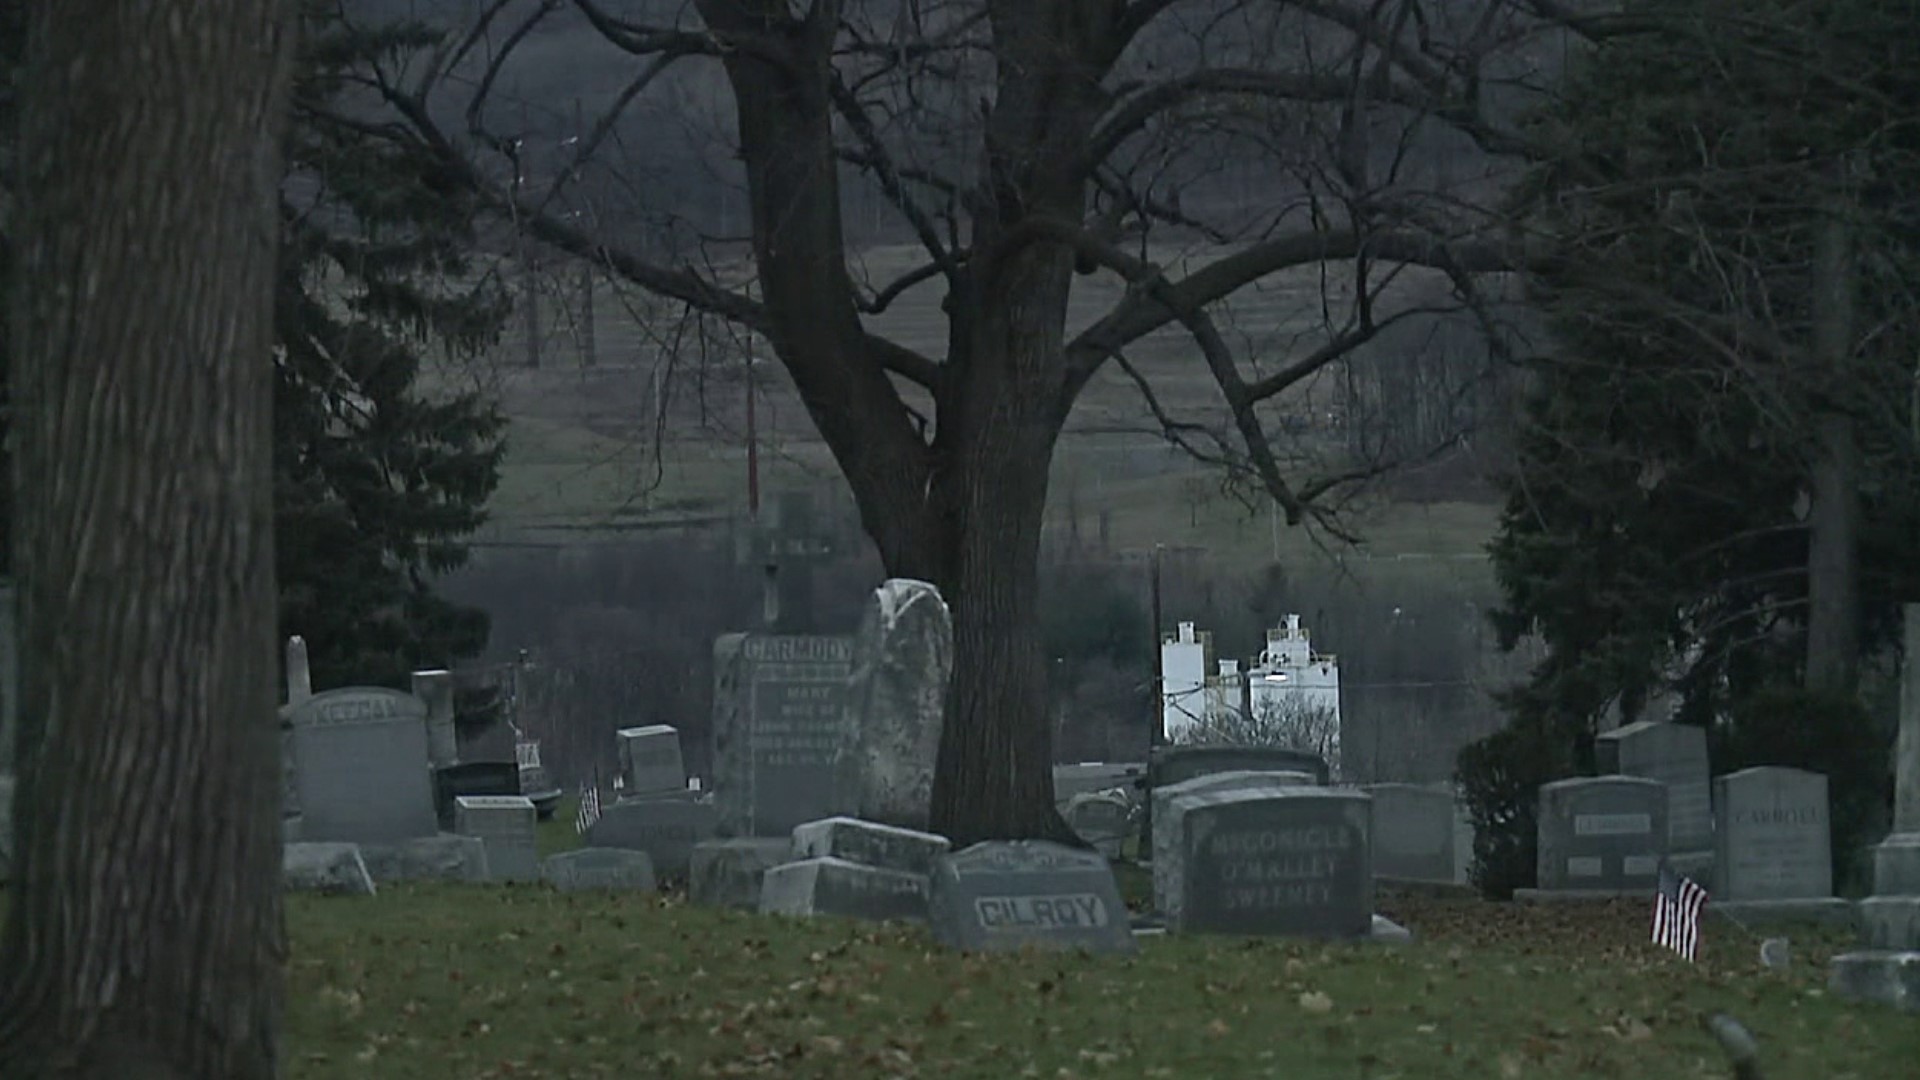 Historians in Lackawanna County are hosting a spooky scavenger hunt through local cemeteries. Newswatch 16's Elizabeth Worthington has the hair-raising report.